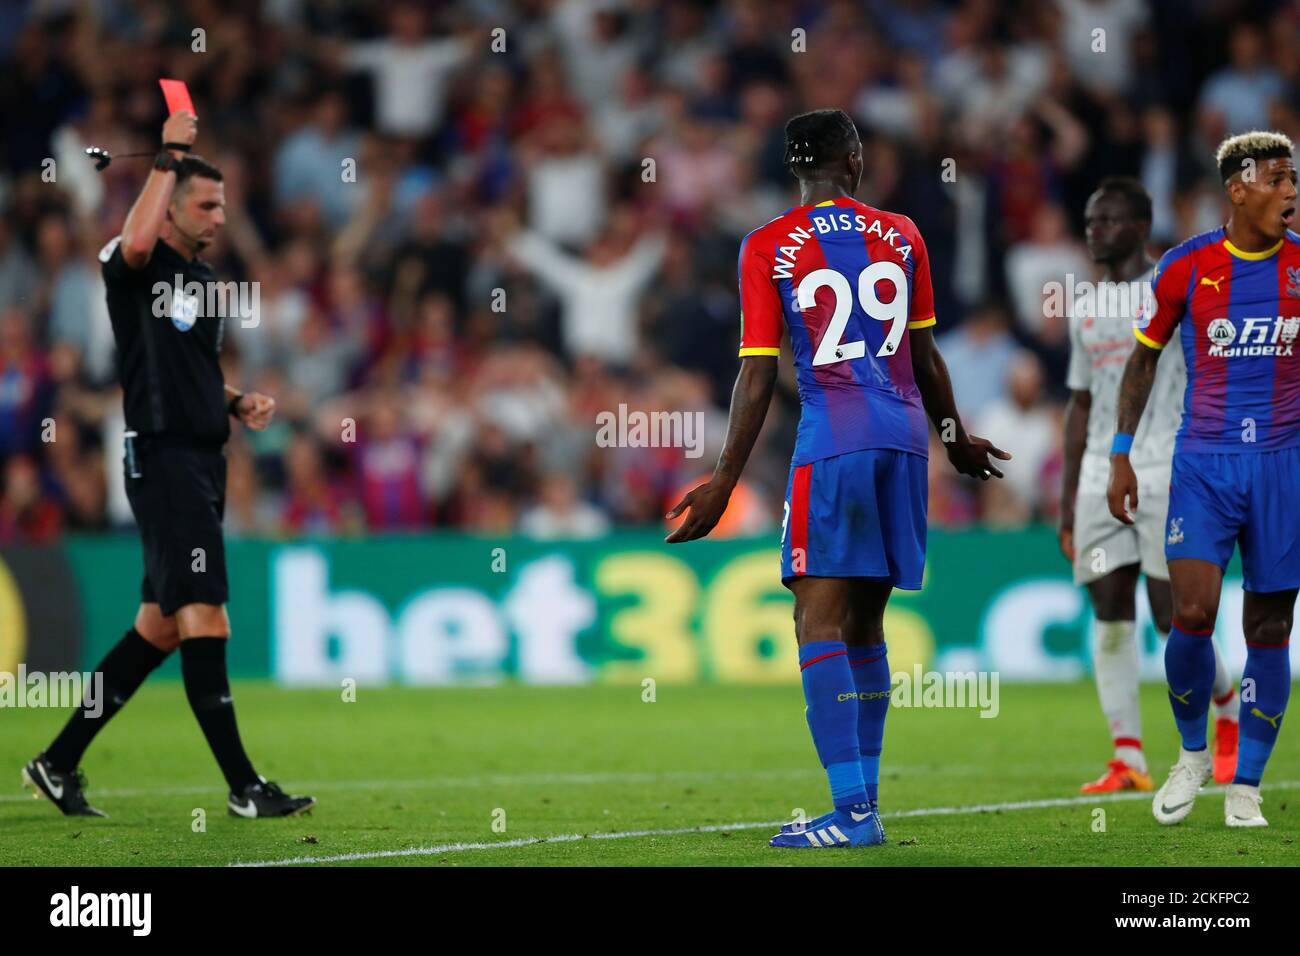 Soccer Football - Premier League - Crystal Palace v Liverpool - Selhurst Park, London, Britain - August 20, 2018  Crystal Palace's Aaron Wan-Bissaka is shown a red card by the referee after conceding a foul against Liverpool's Mohamed Salah (not pictured)                        REUTERS/Eddie Keogh  EDITORIAL USE ONLY. No use with unauthorized audio, video, data, fixture lists, club/league logos or "live" services. Online in-match use limited to 75 images, no video emulation. No use in betting, games or single club/league/player publications.  Please contact your account representative for furt Stock Photo